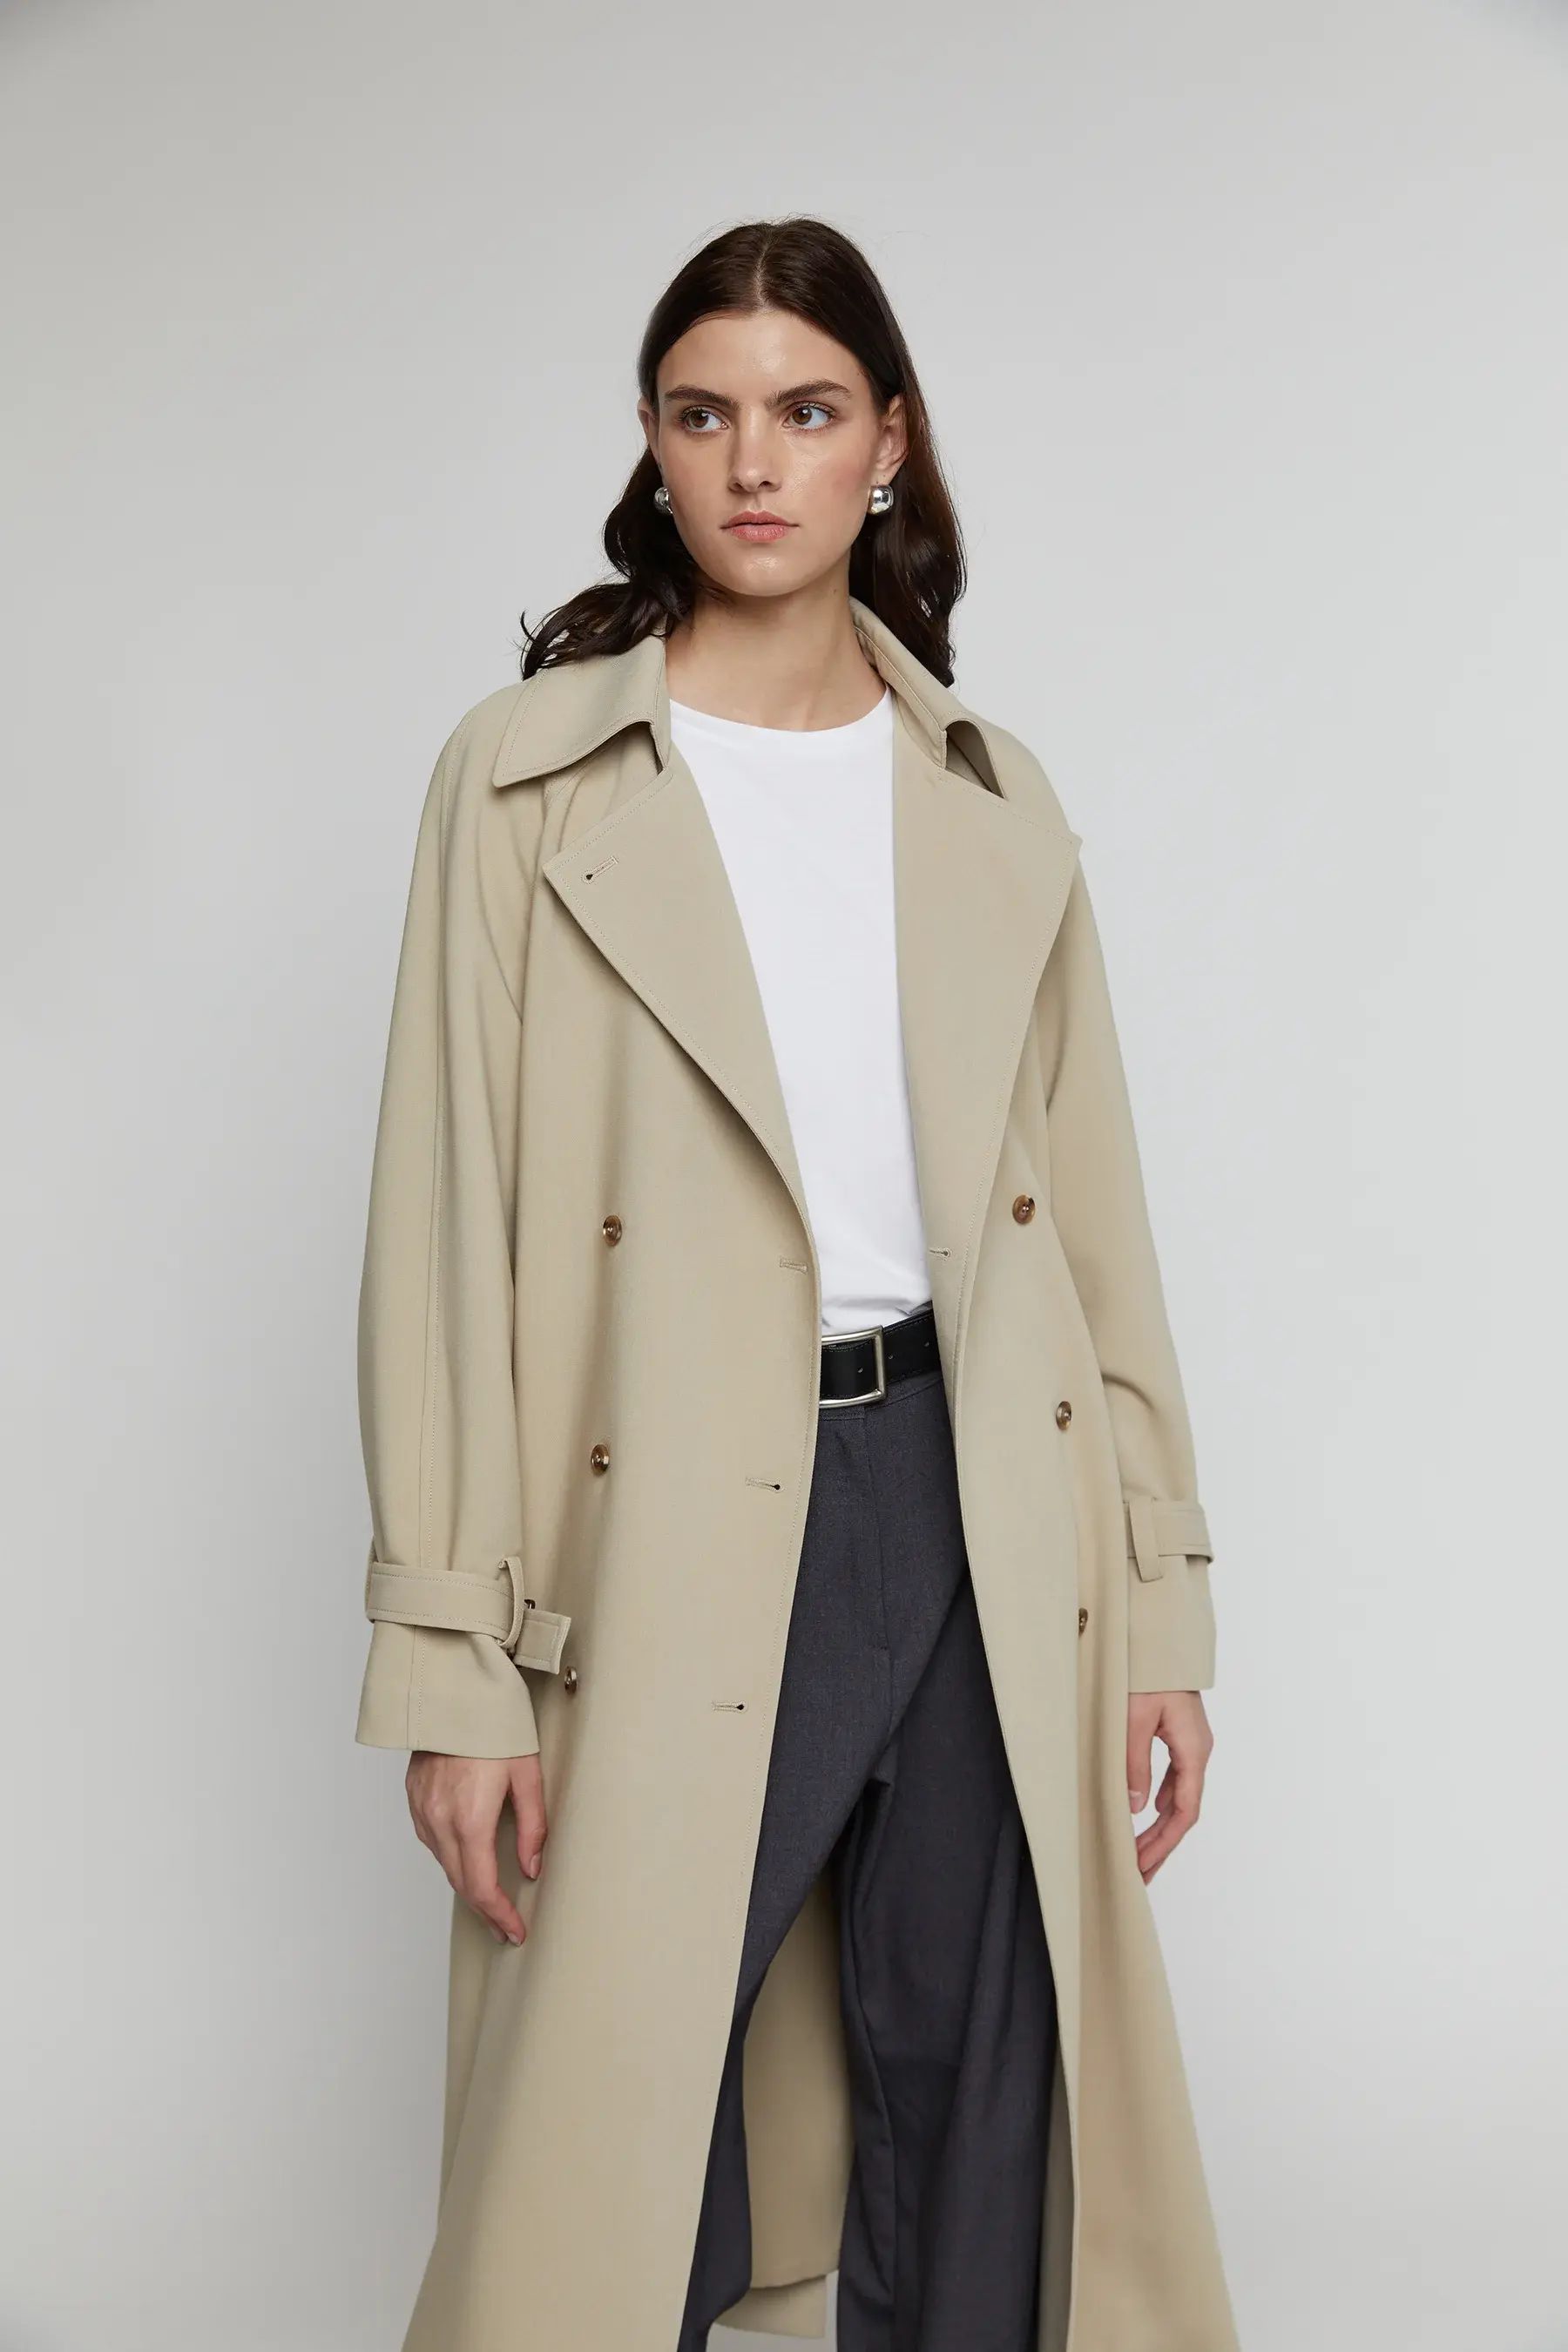 OVERSIZED TRENCH COAT        4.5 star rating   37 Reviews          $188   
 OW-10088-W  Beige  Be... | OAK + FORT